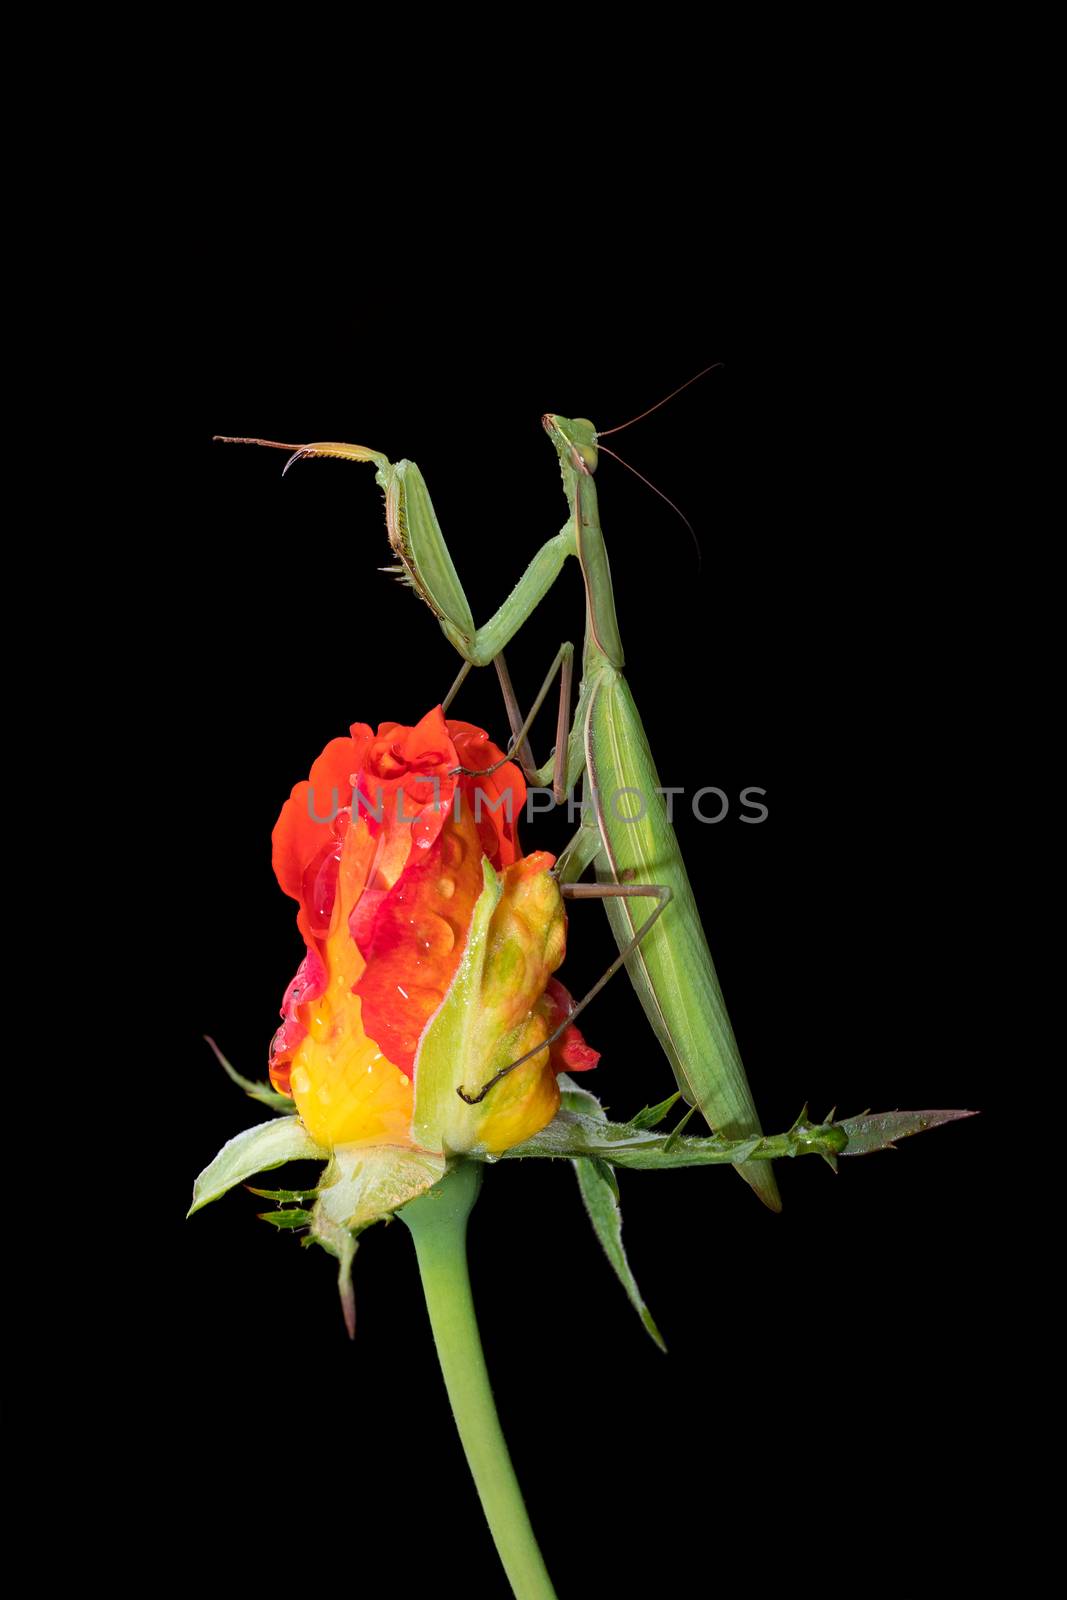 Green Praying Mantis, Mantis religiosa, sitting on a rosebud isolated on black in its typical pose, waiting for insects to catch them. Outside of Europe this species is also called European Mantis.